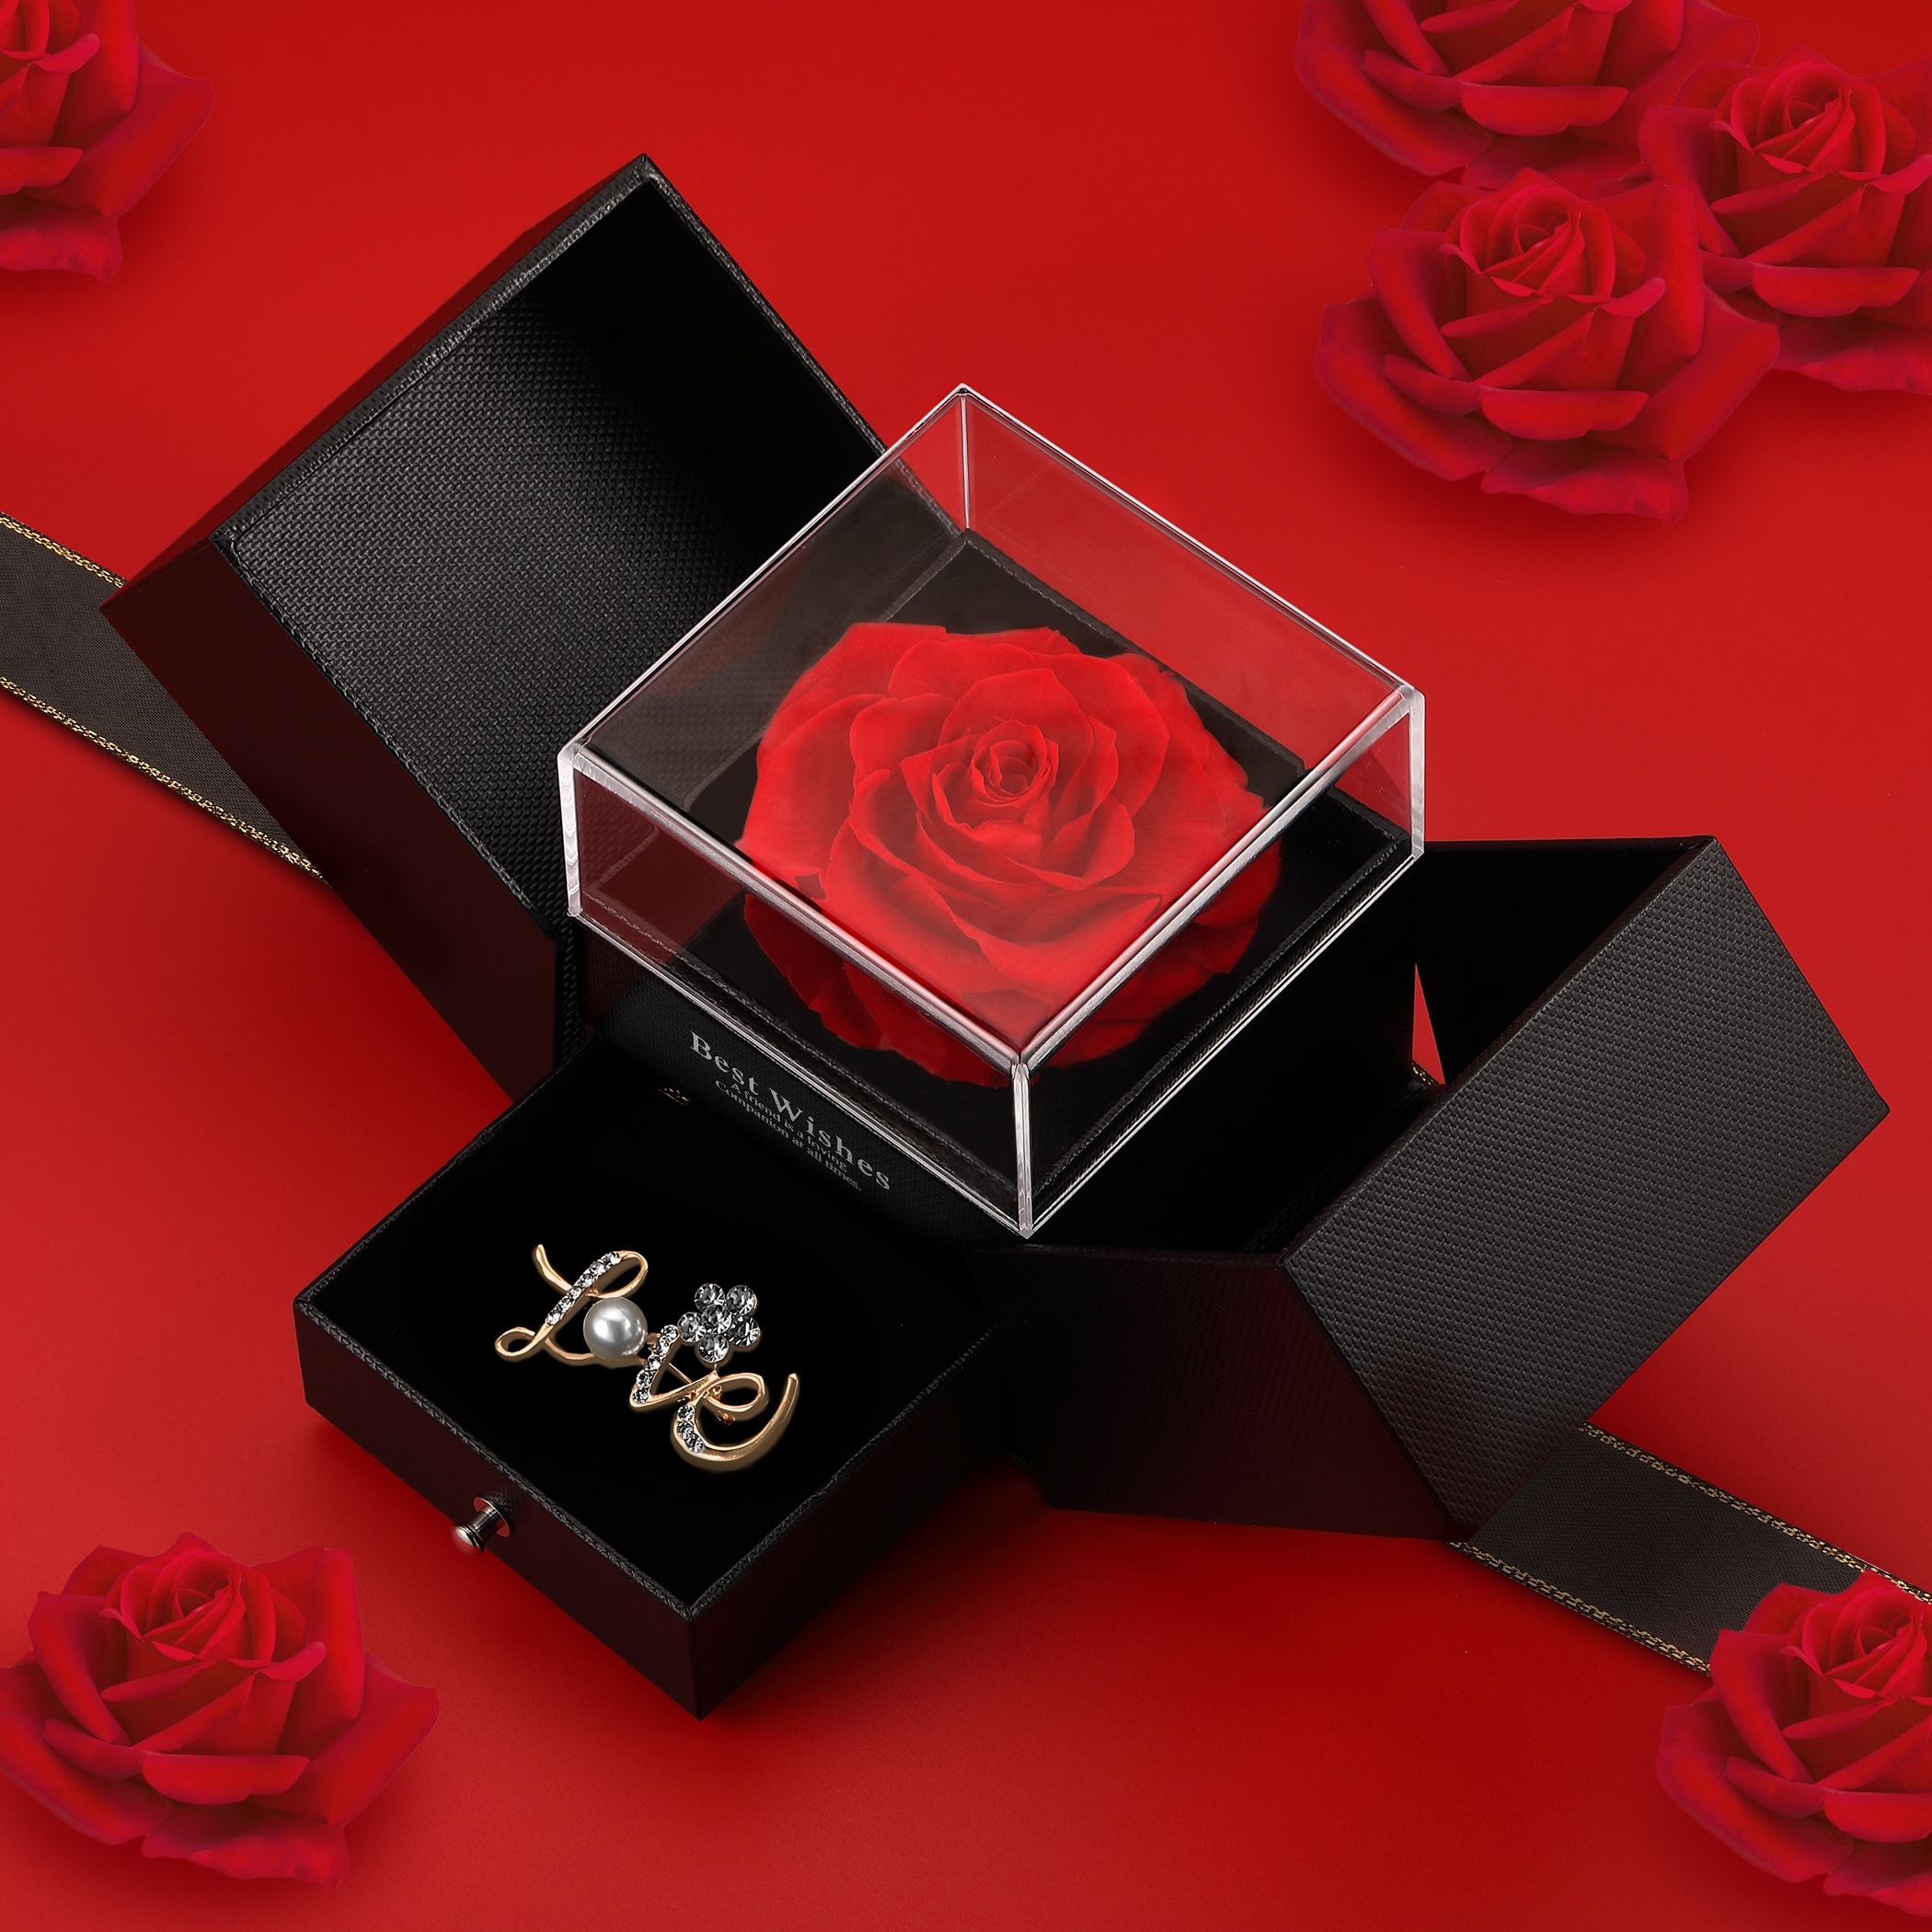 Preserved Real Rose With Necklace And Earrings In A Box,enchanted Eternal  Rose Romantic Gifts For Her Women Girlfriend Wife On Valentines Day